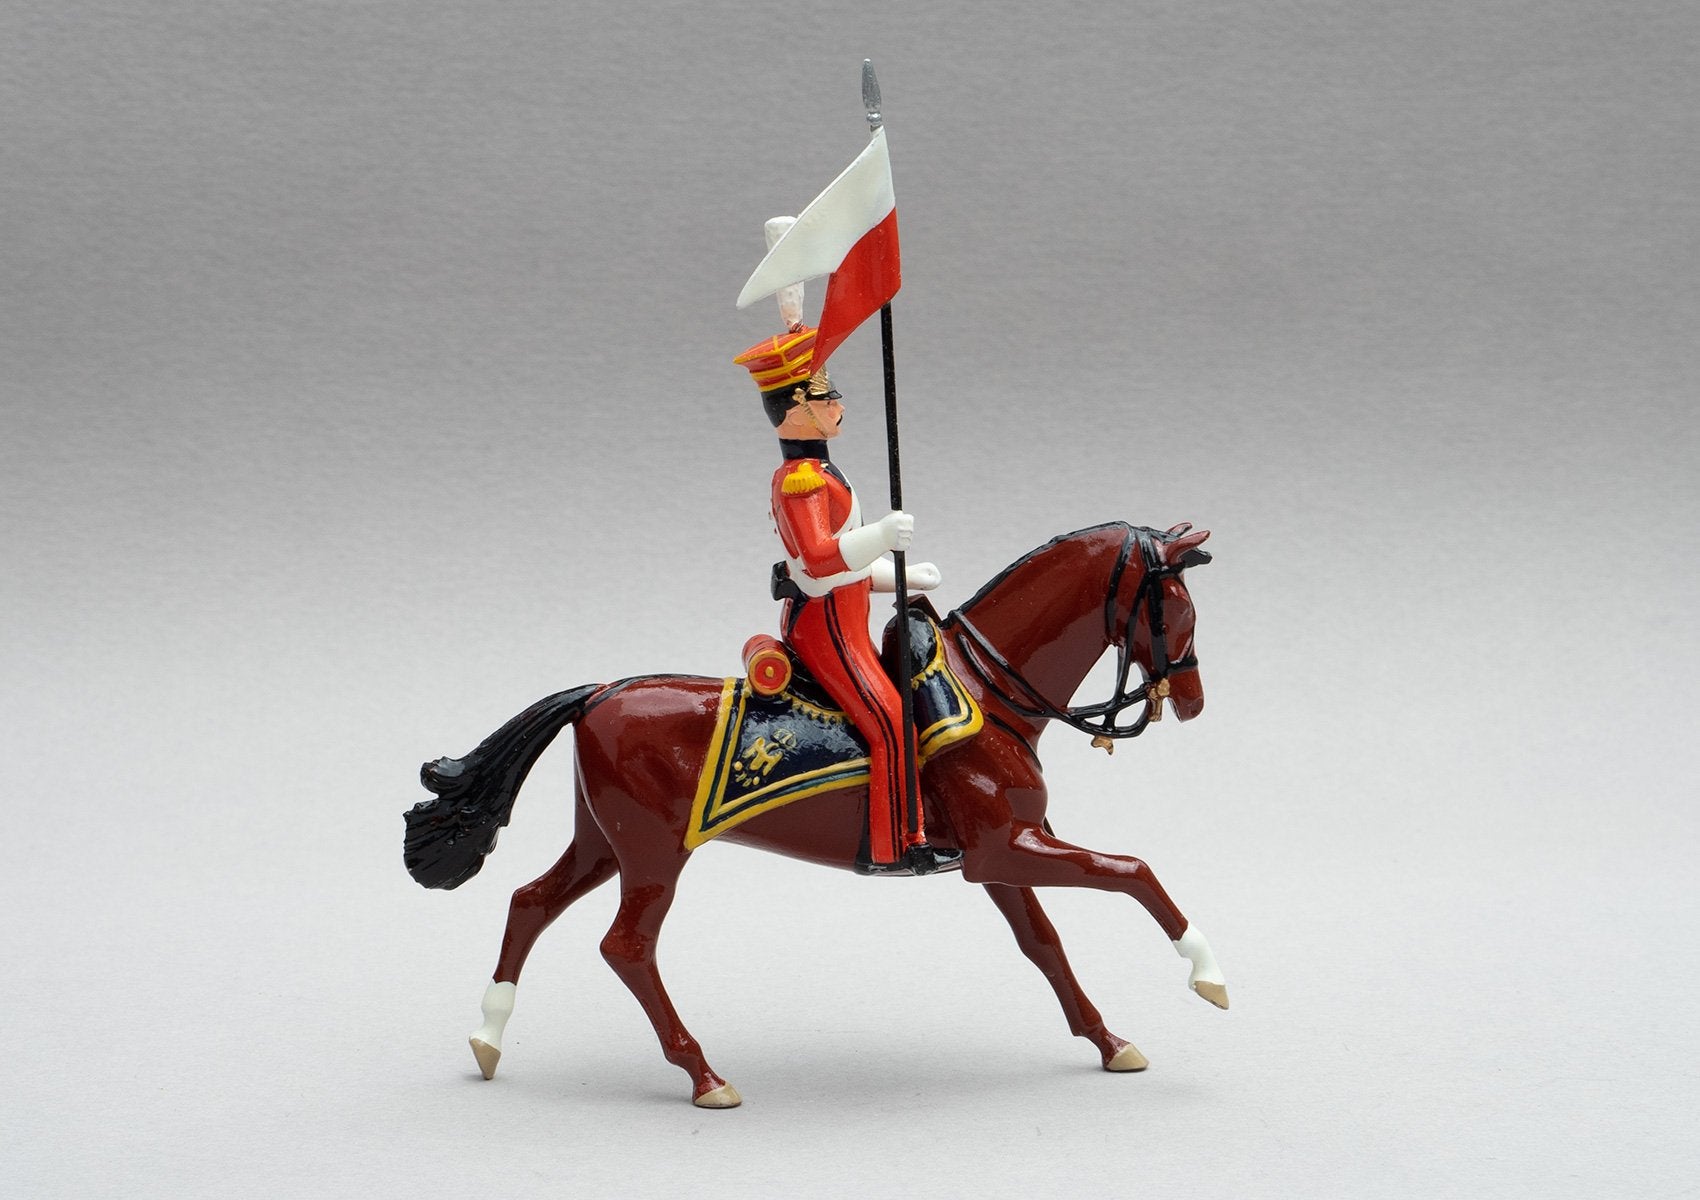 Set 105 Dutch Lancers | Cavalry | Napoleonic Wars | Single Dutch Lancer dressed in orange uniform with lance adorned with red and white pennant | Waterloo | © Imperial Productions | Sculpt by David Cowe